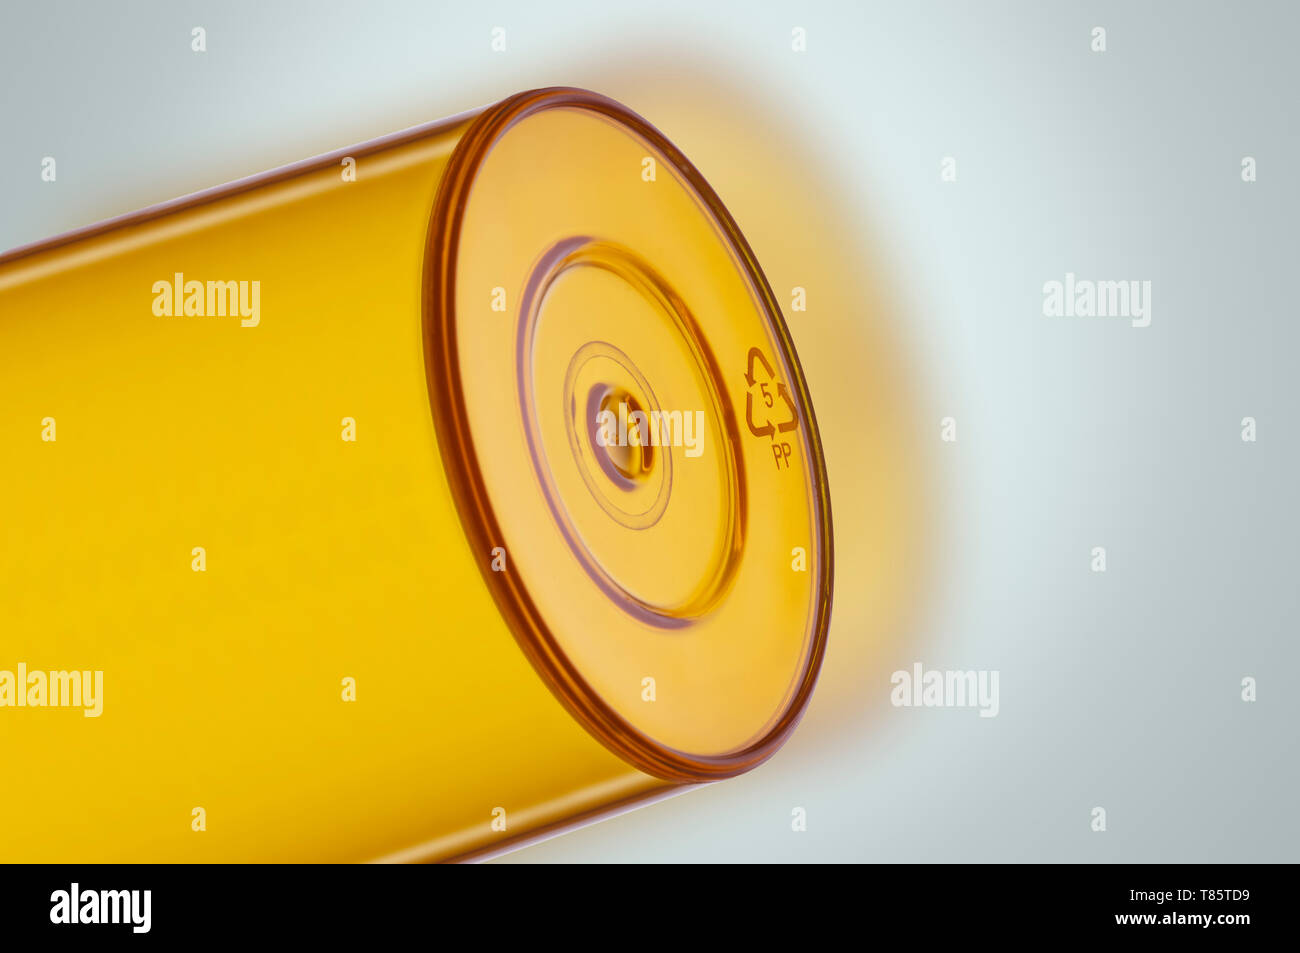 Pill bottle with recycle symbol Stock Photo